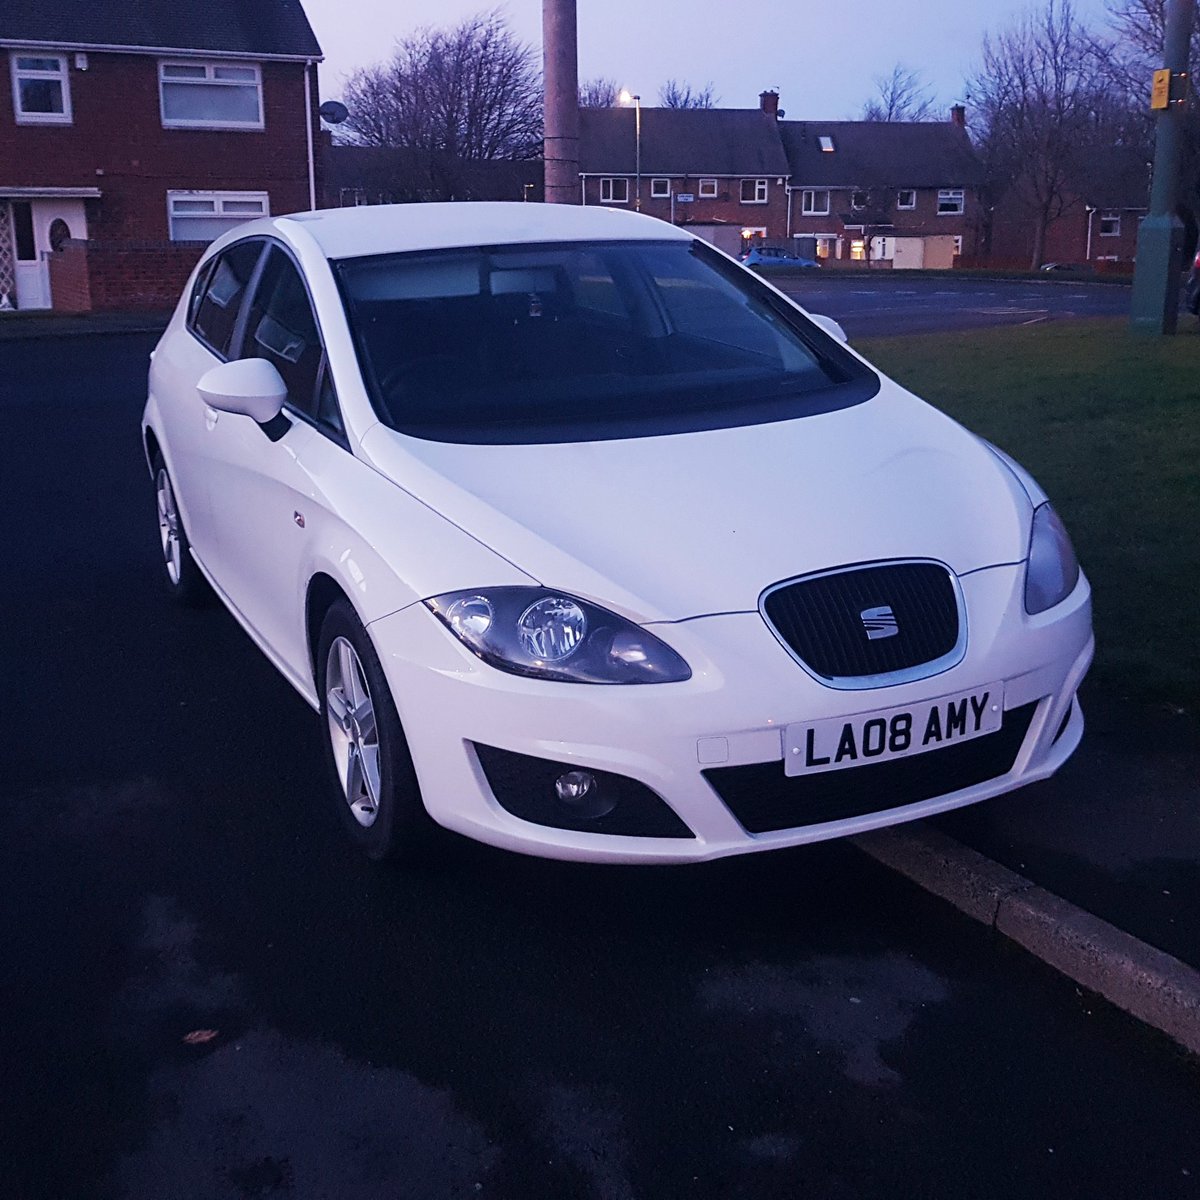 Cannot believe ive had my little car for a year already.
#seatleon2011 #FirstCar #privatereg #Amy